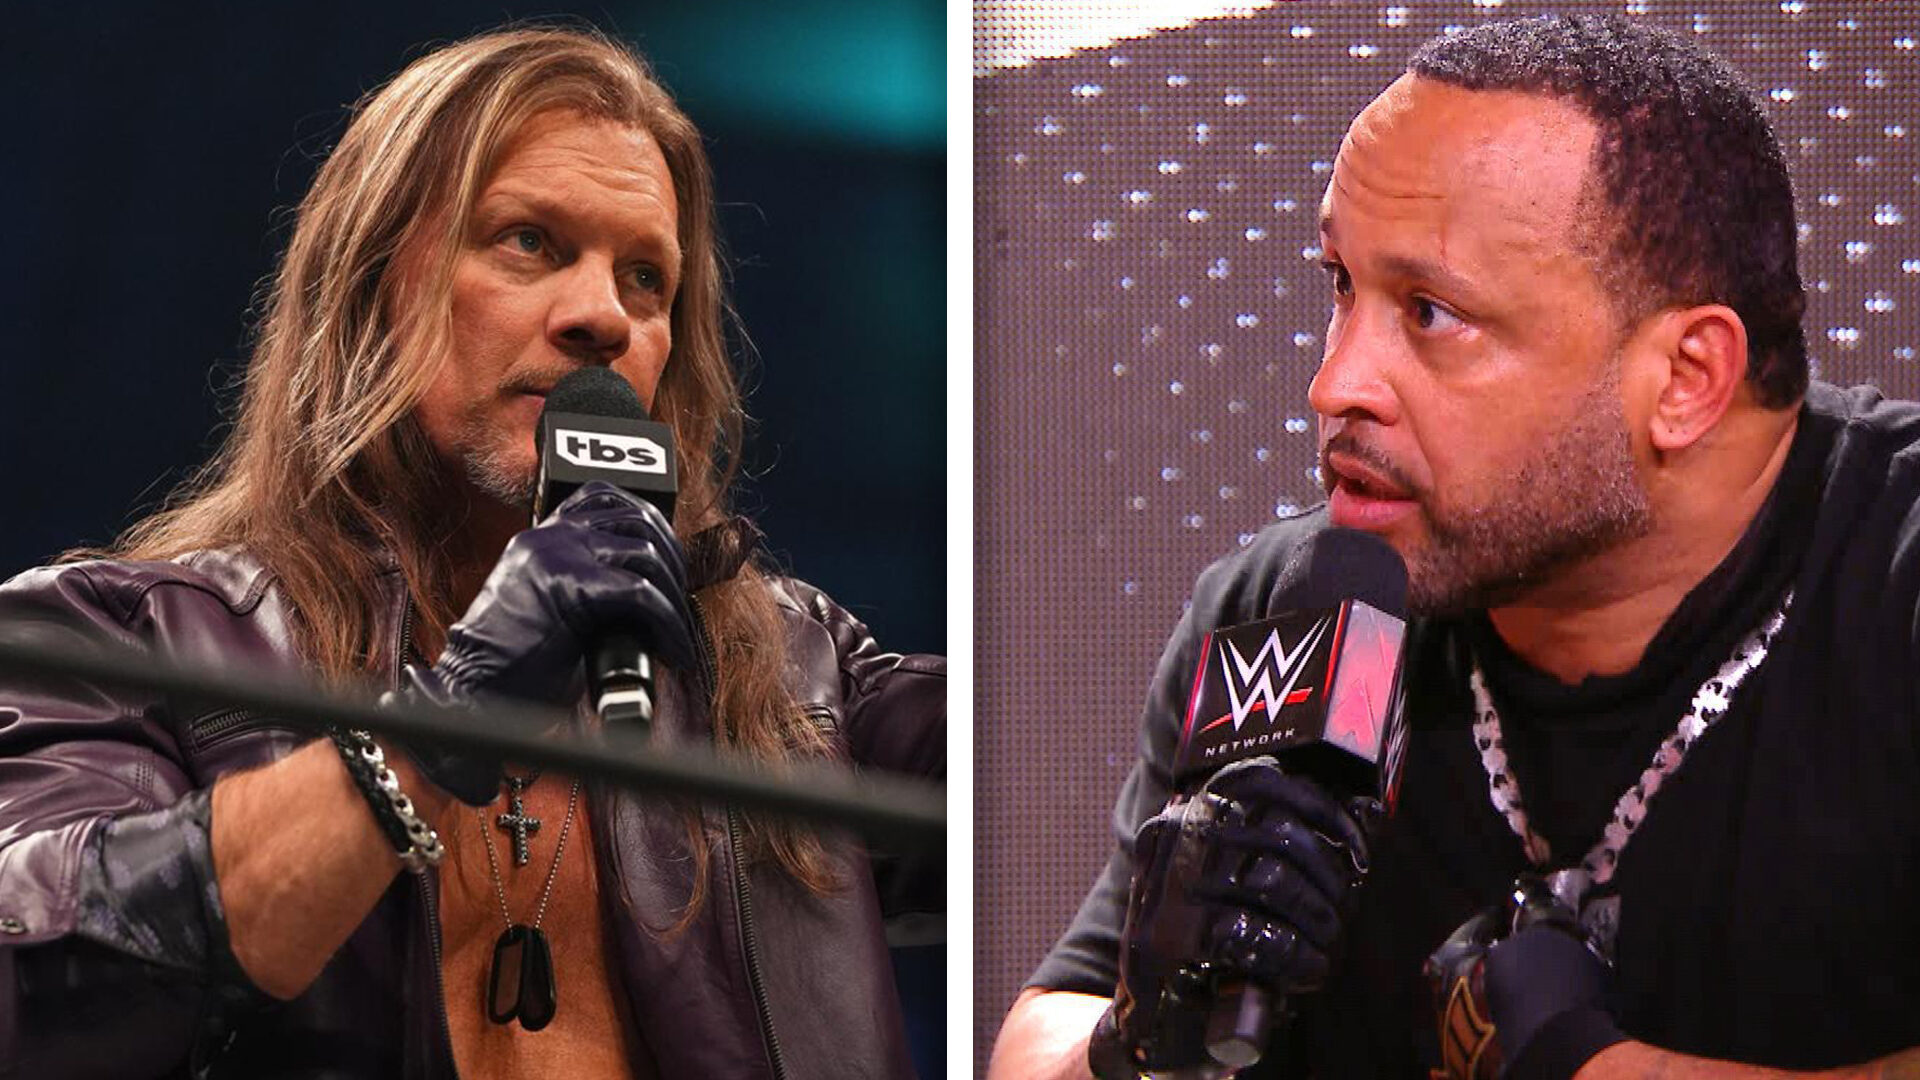 Chris Jericho and MVP Involved In Confrontation At Hotel, MVP Responds